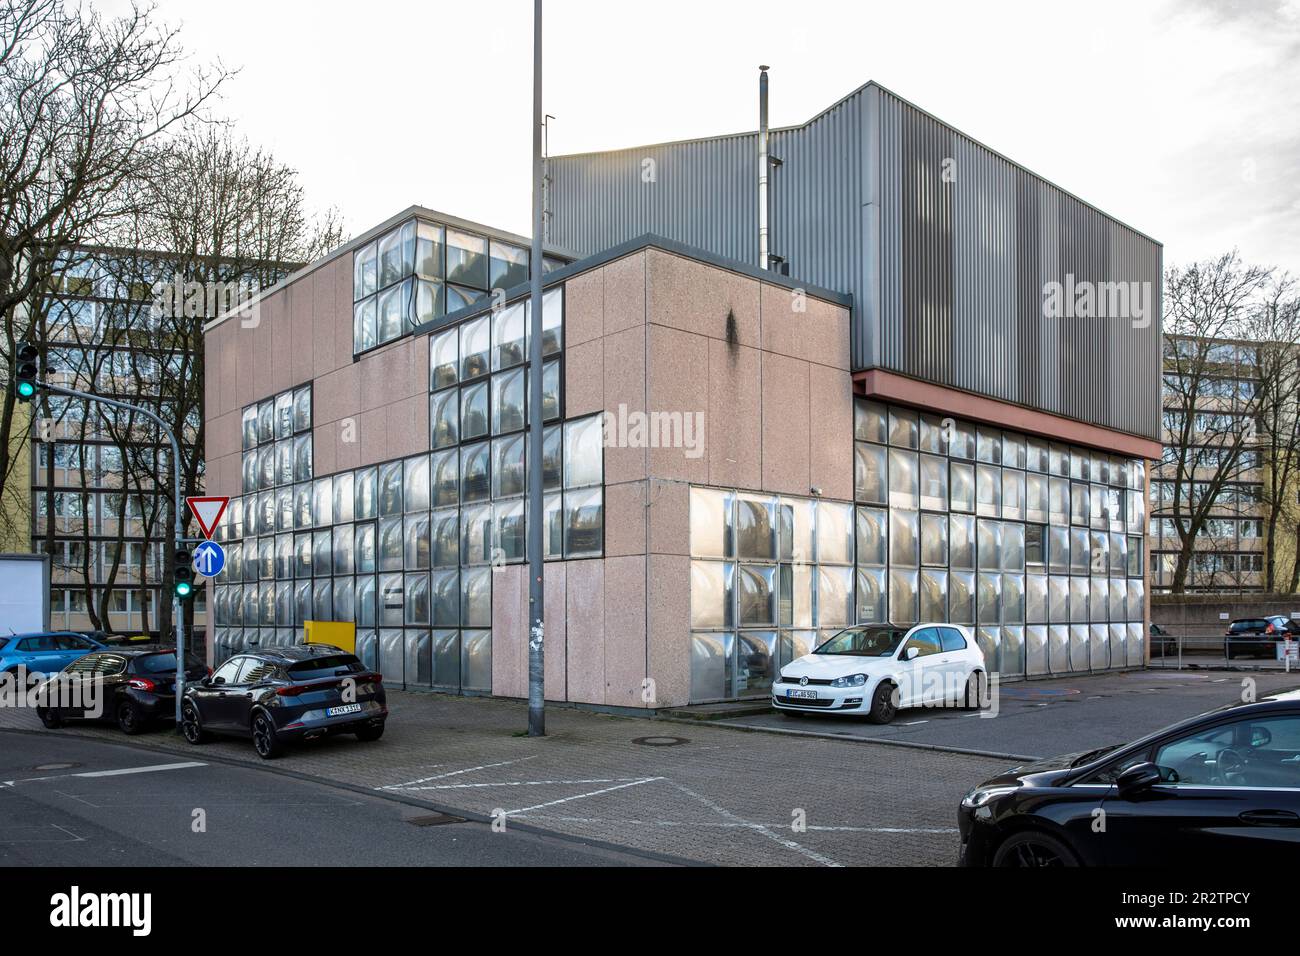 gallery house ads1a in a former transformer station in Riehl district, Bernd Kniess Architects Urban Planners, Cologne, Germany. Galeriehaus ads1a in Stock Photo